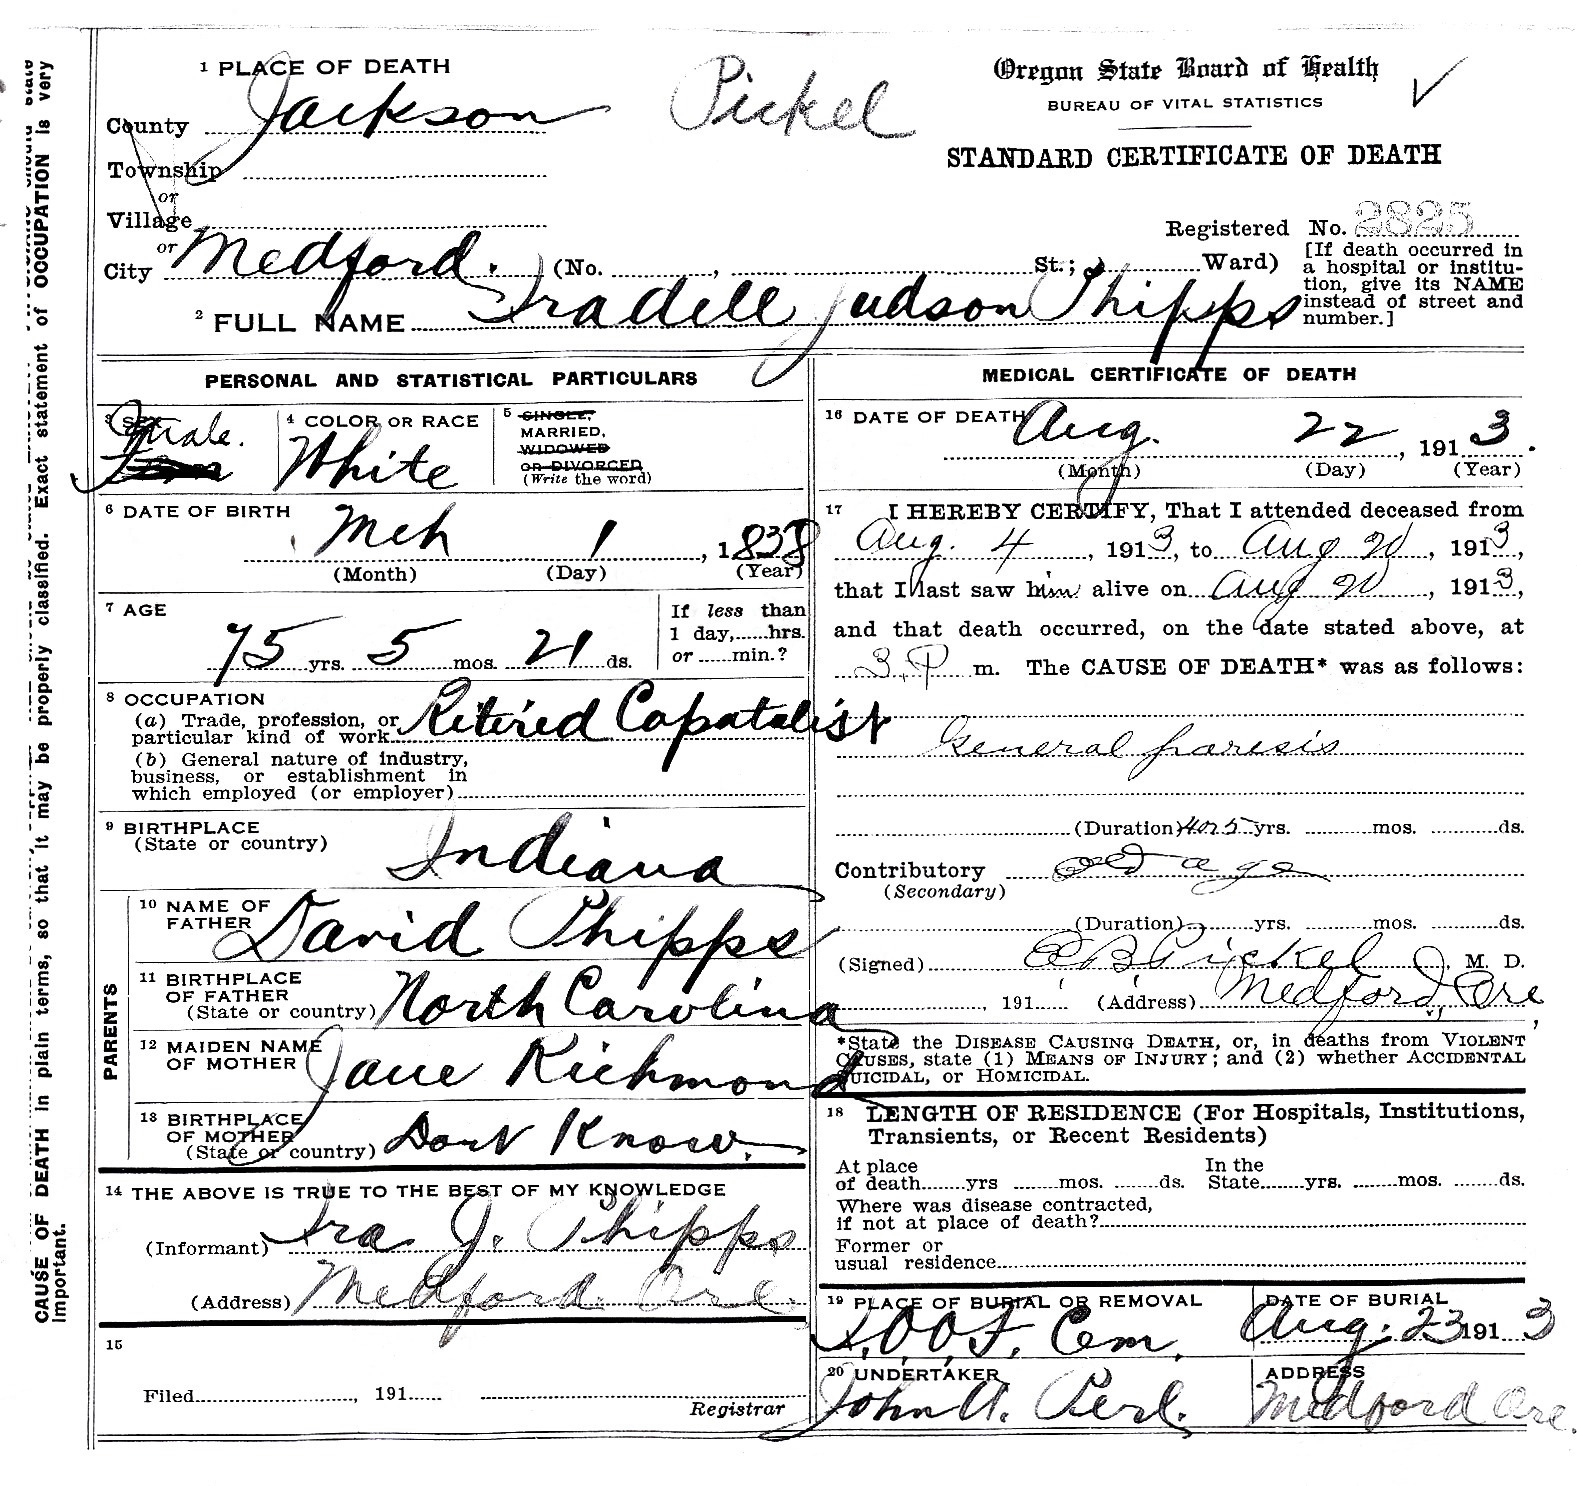 Iradell Judson Phipps death certificate, August 22, 1913